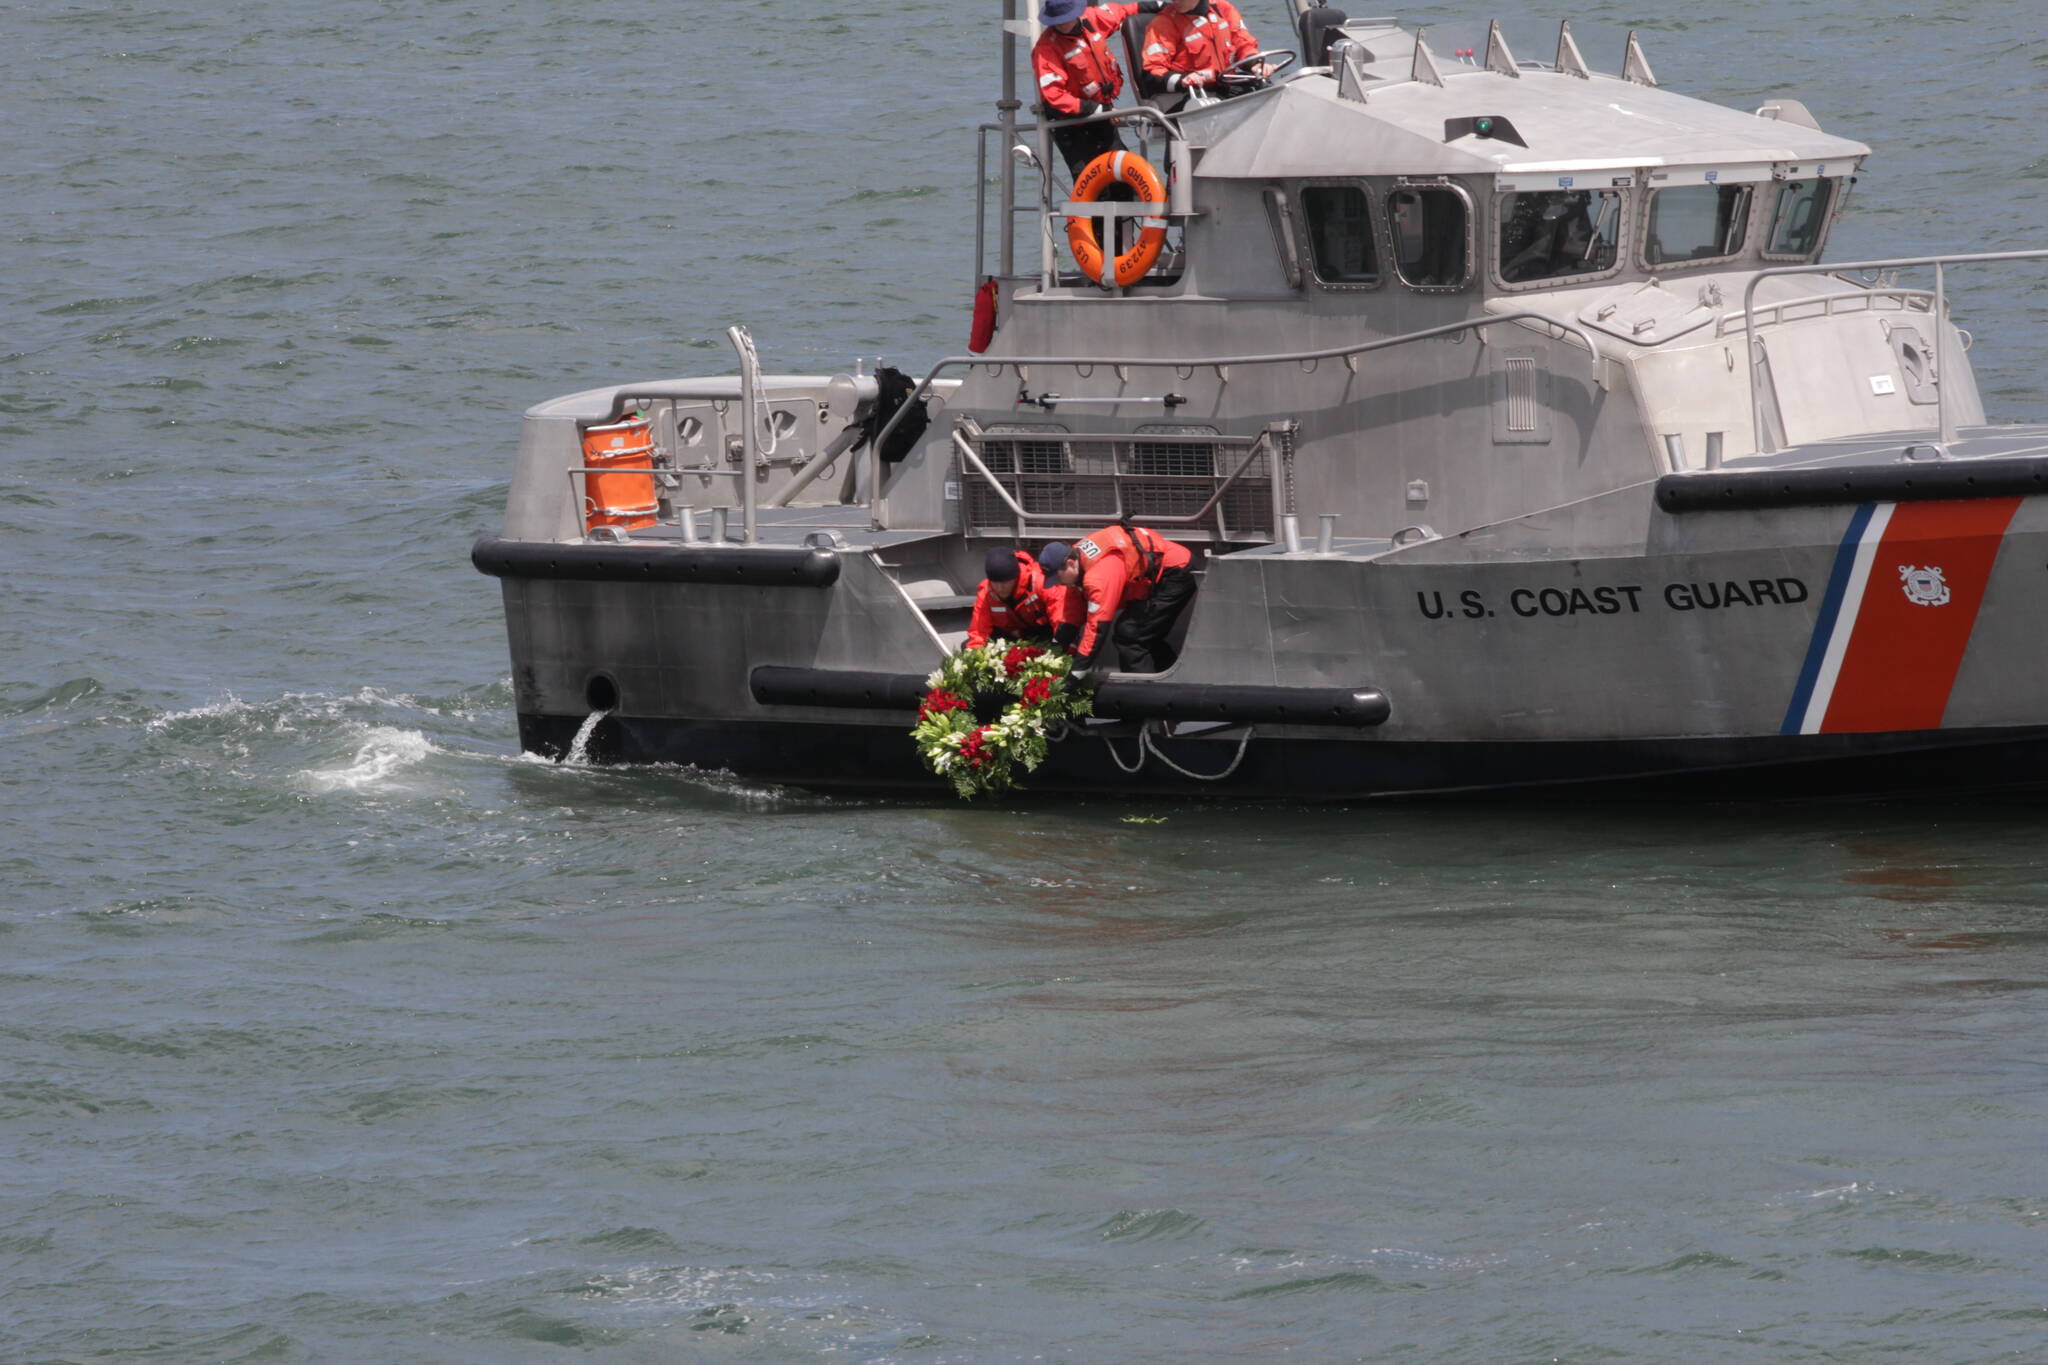 A boat crew from Coast Guard Station Grays Harbor lower the traditional wreath into the ocean during the Blessing of the Fleet on May 28 in Westport. (Michael S. Lockett / The Daily World)